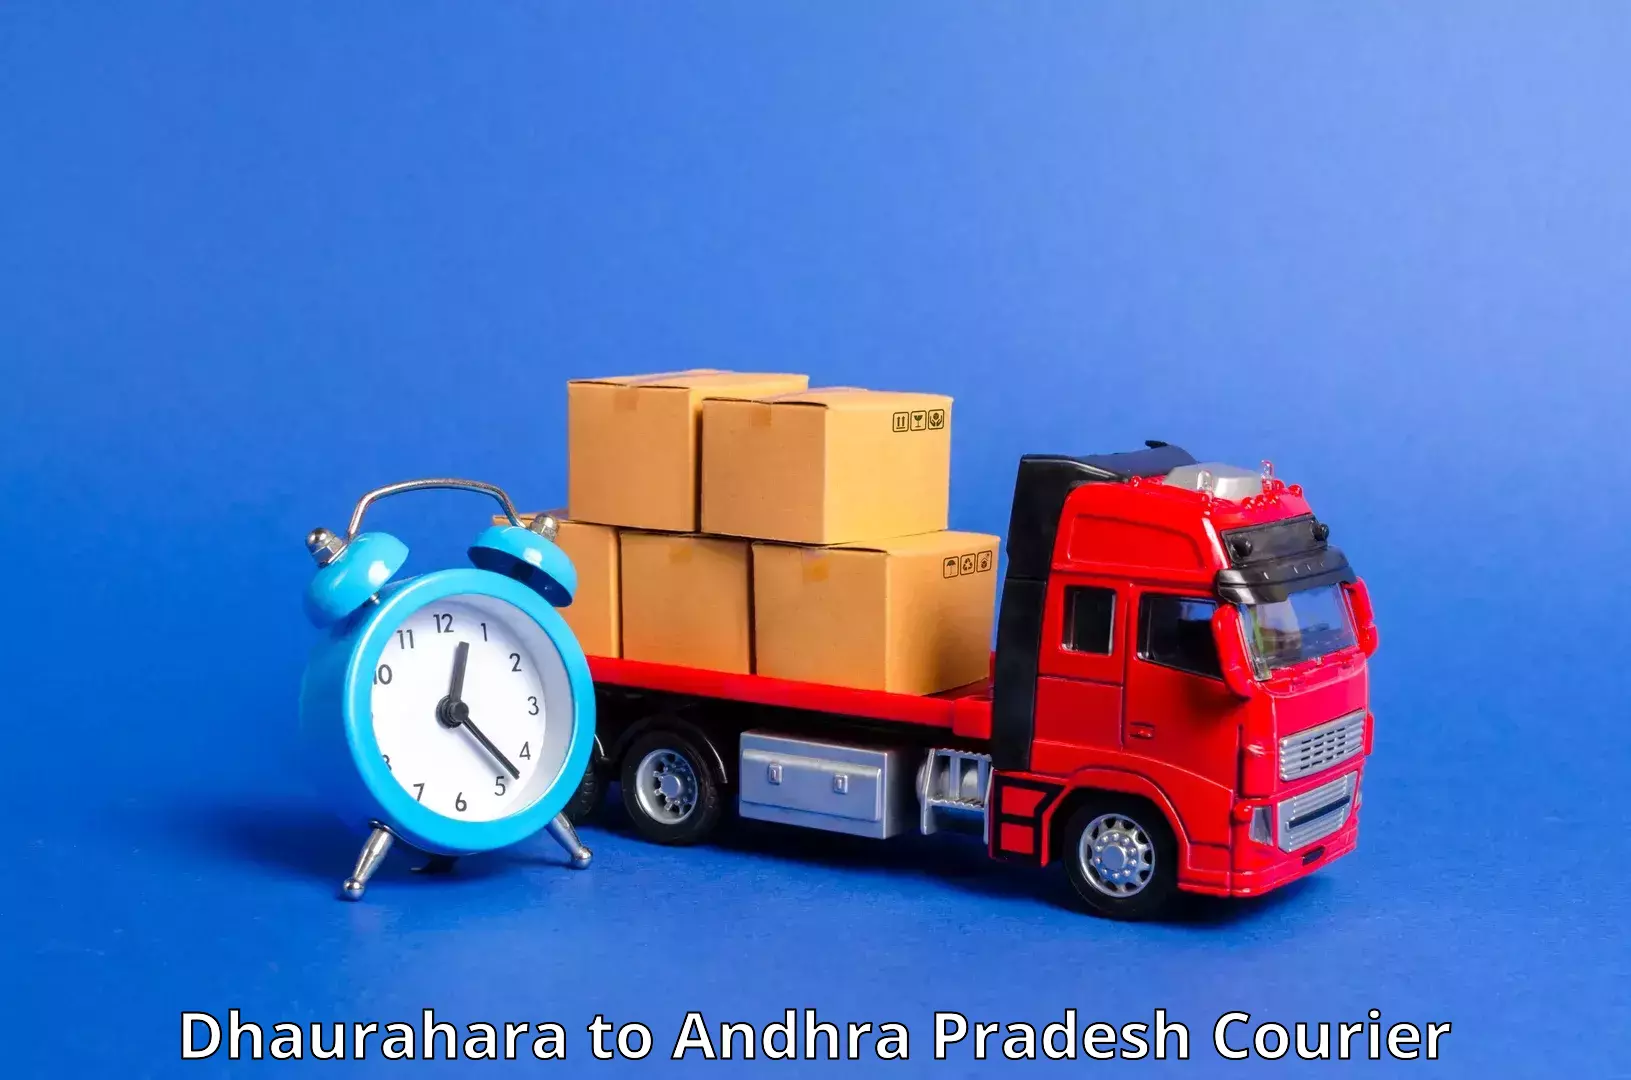 Express delivery capabilities Dhaurahara to Kothapalli